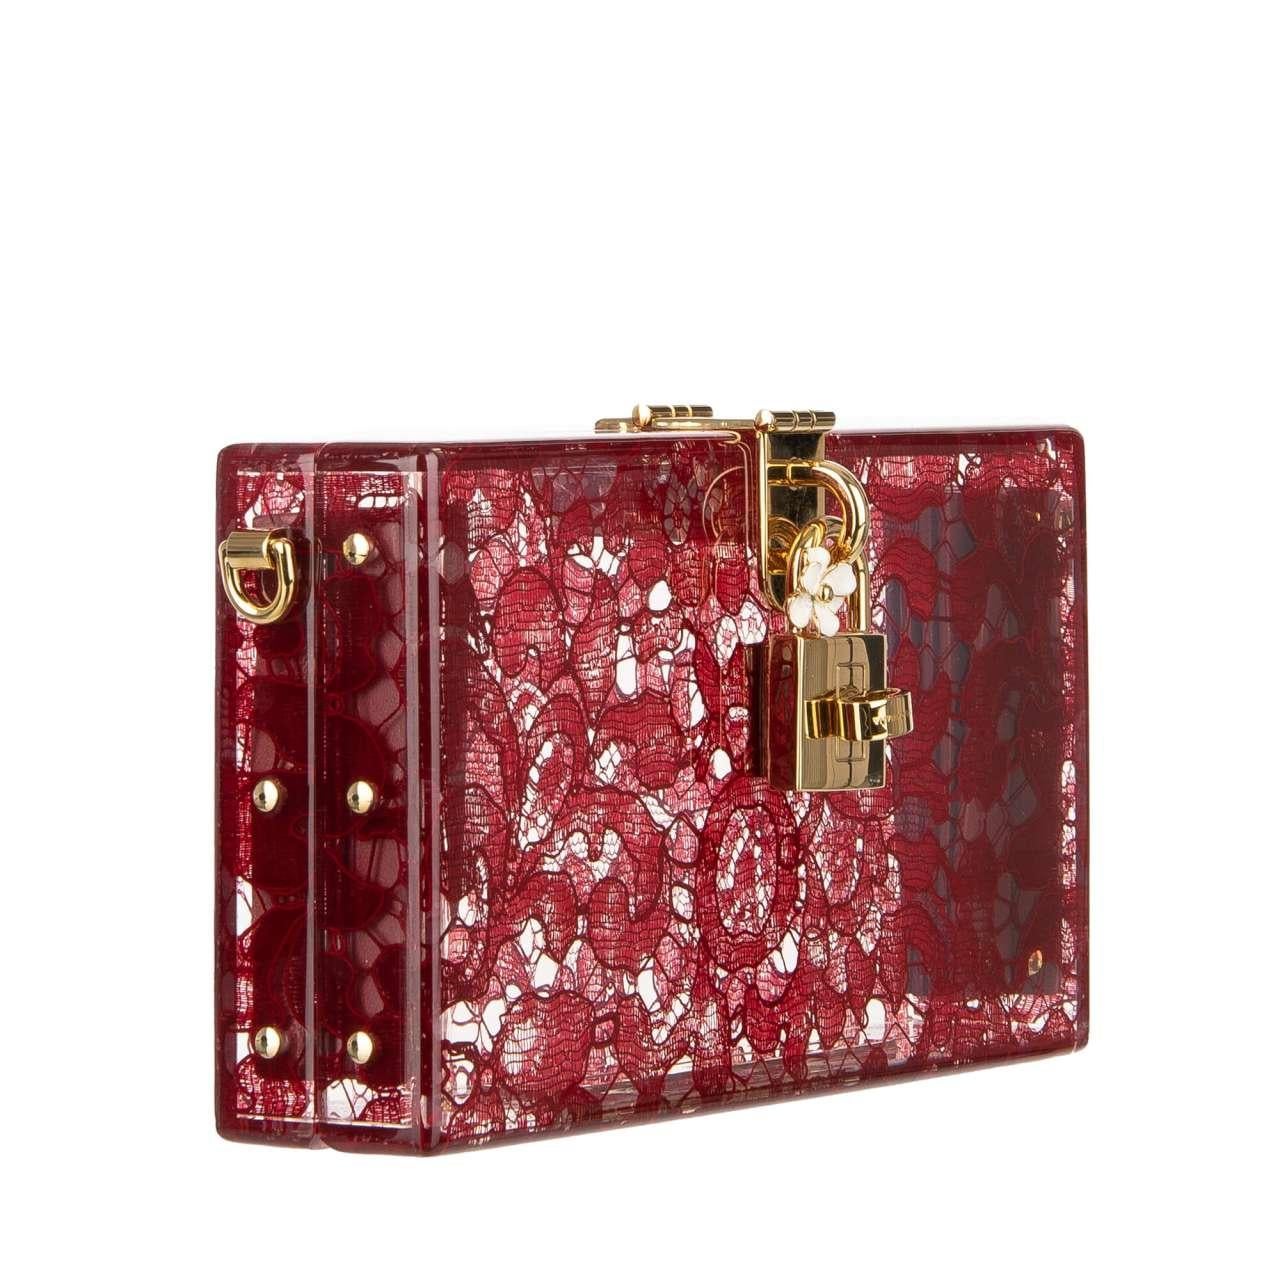 - Plexiglass clutch / evening bag DOLCE BOX from Rainbow collection with Taormina lace insert and decorative padlock by DOLCE & GABBANA - New with Tag, Authenticity Card and Dustbag - Former RRP: EUR 1.450 - MADE IN ITALY - Material: 90% Plexiglass